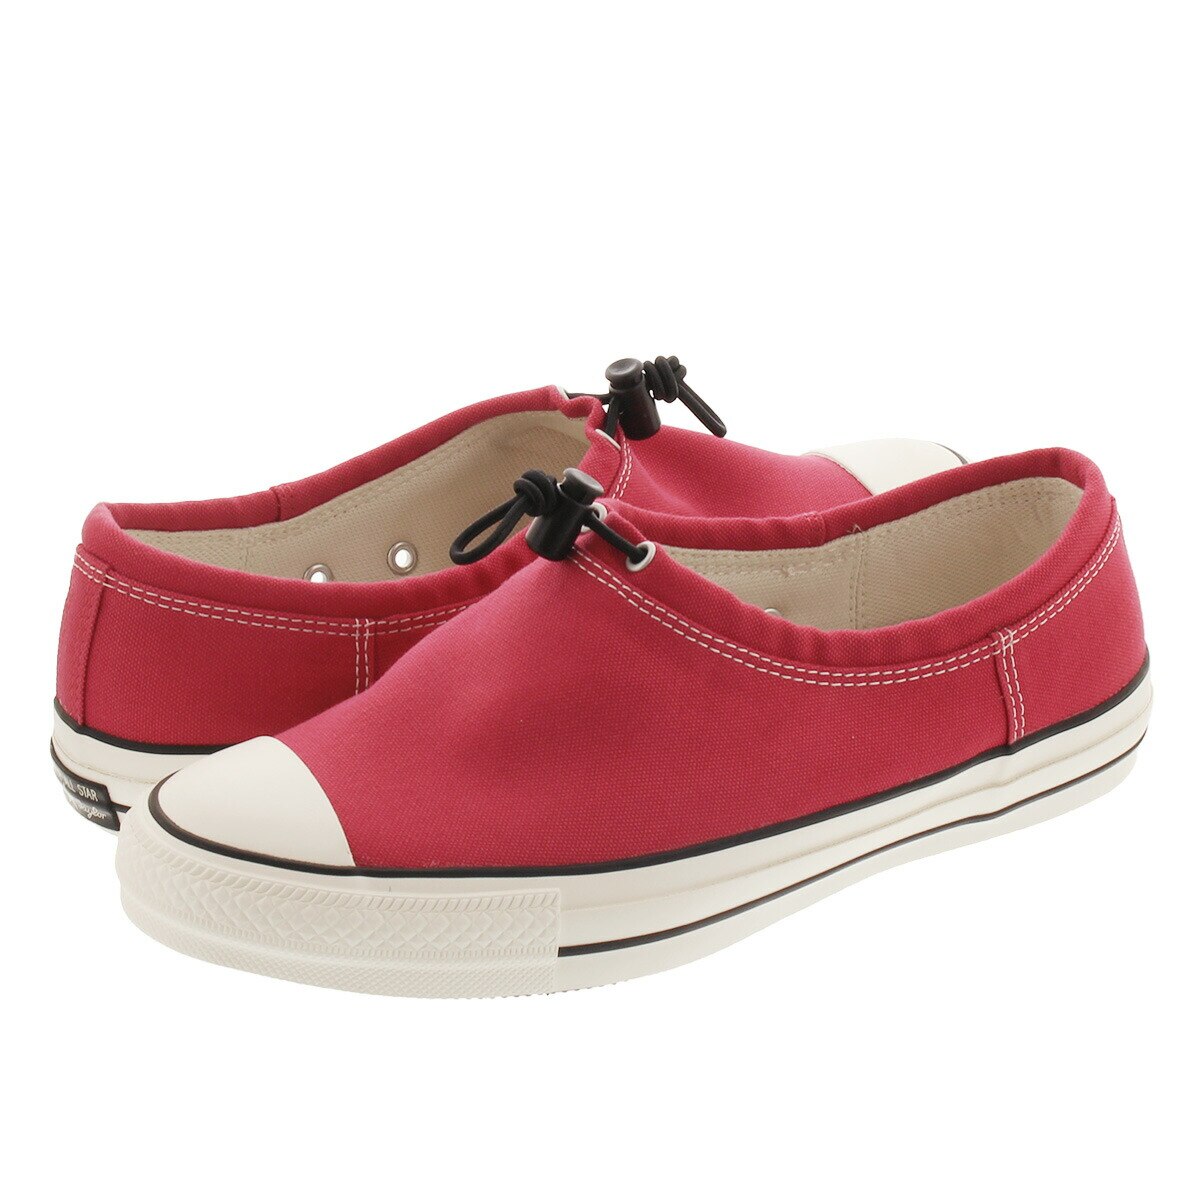 CONVERSE ALL STAR 100 TOGGLE OX RED